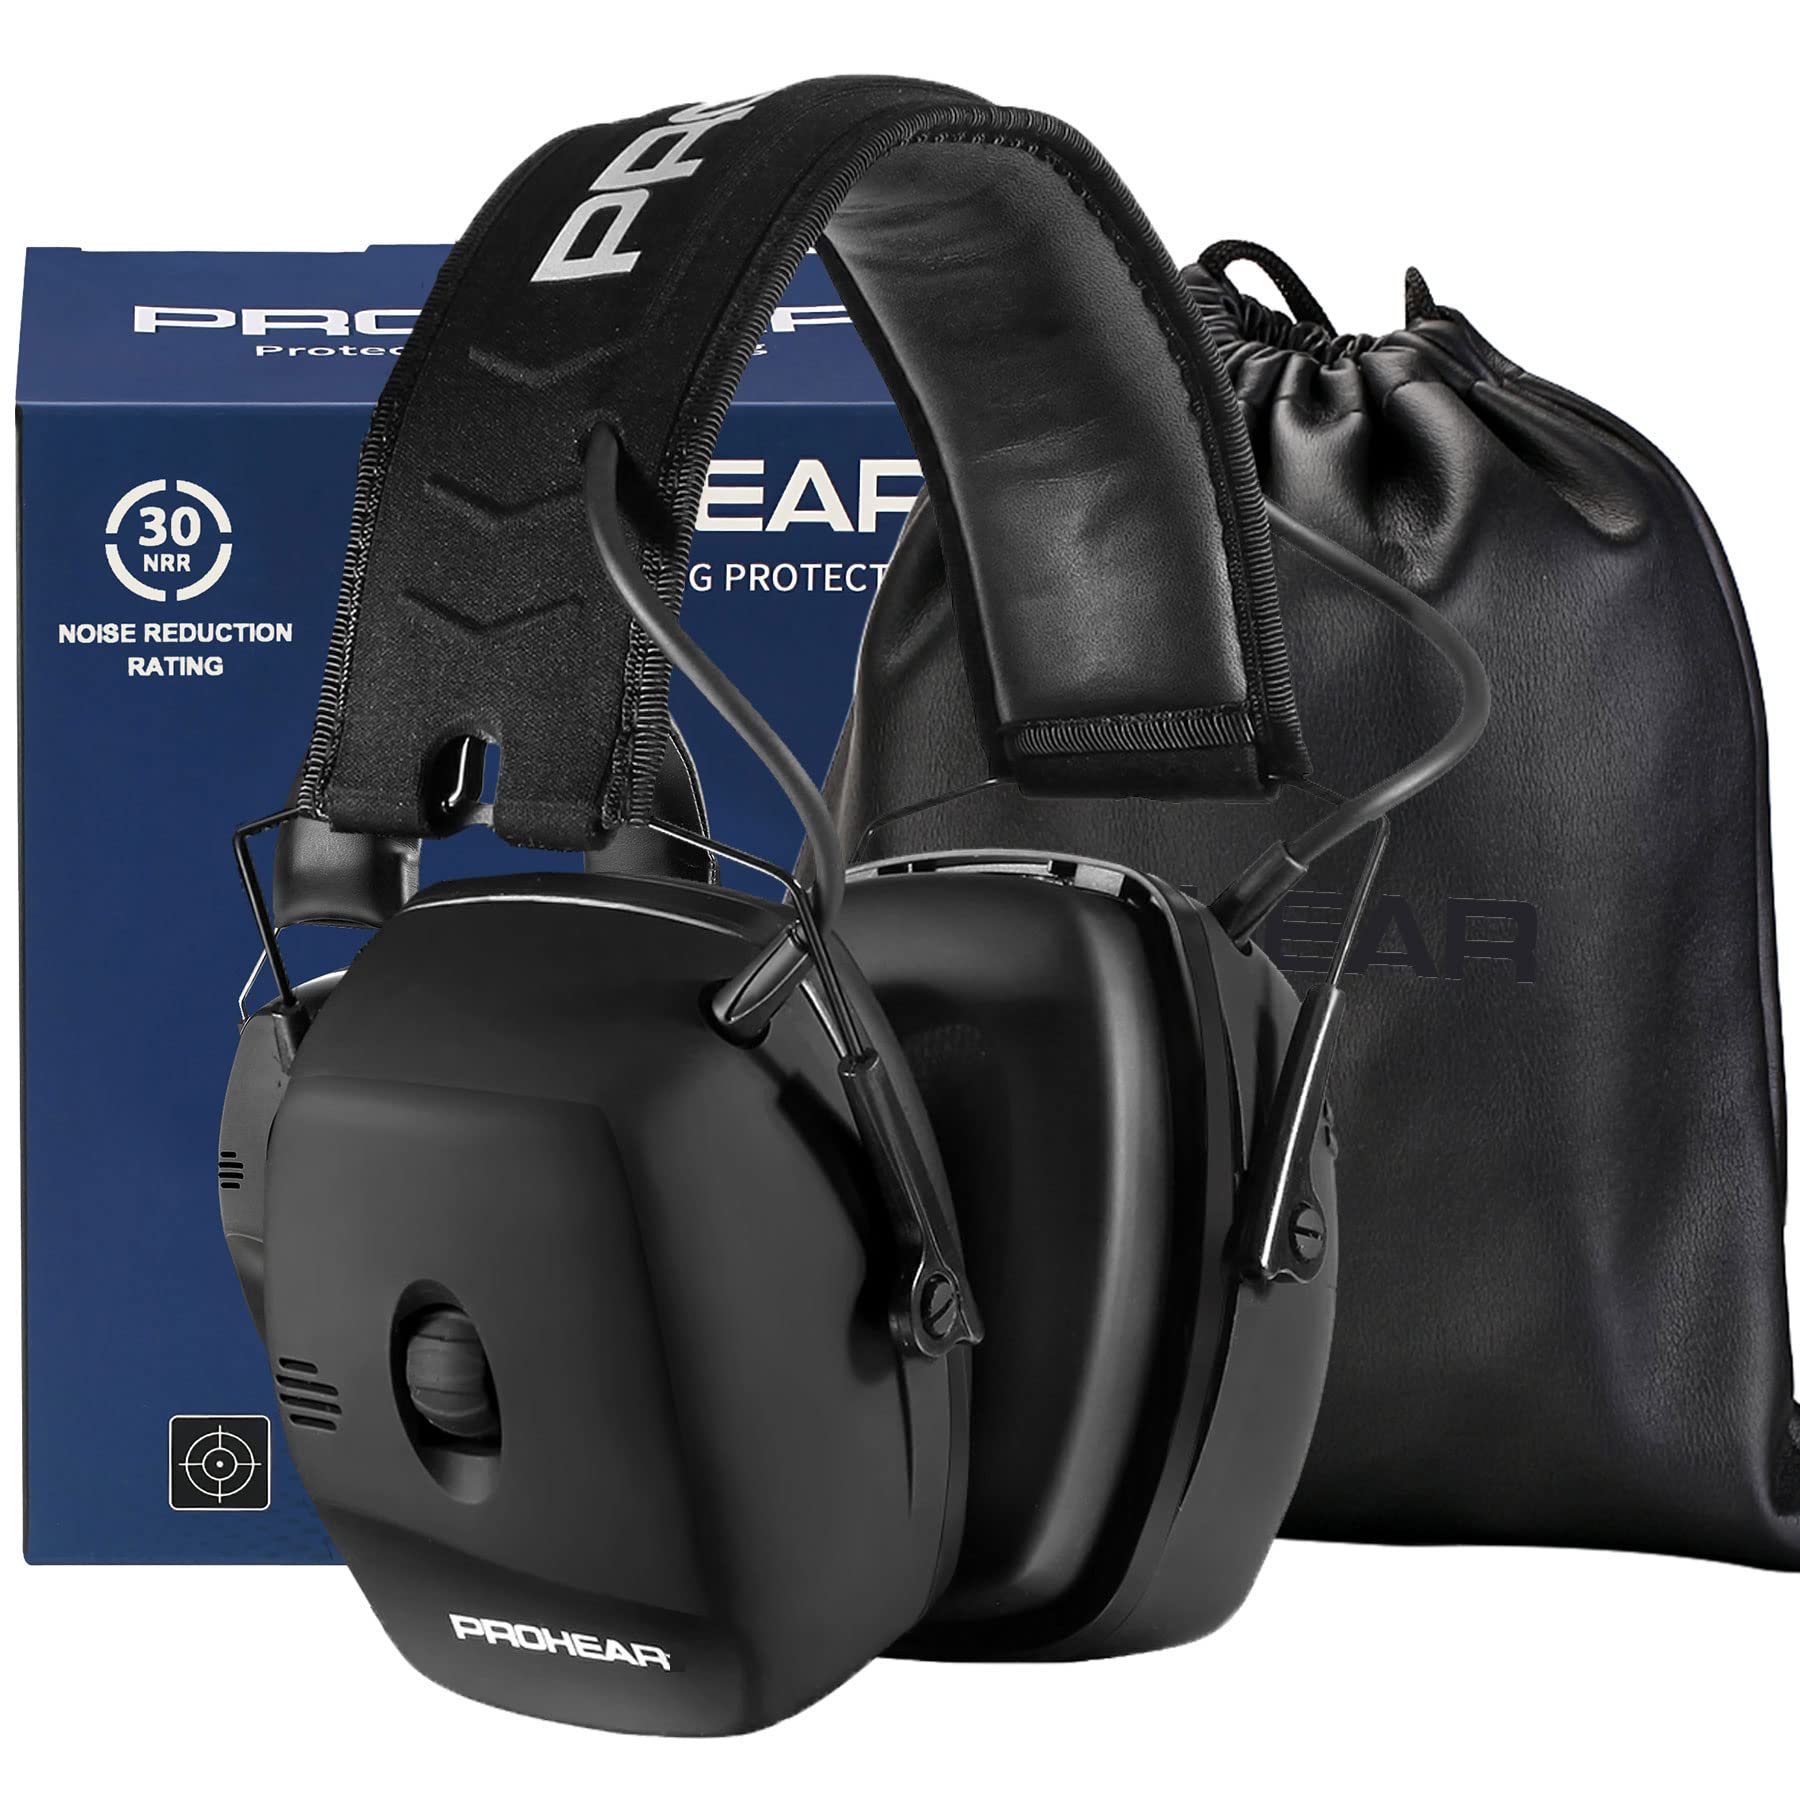 PROHEAR 056 Electronic Shooting Ear Protection Muffs